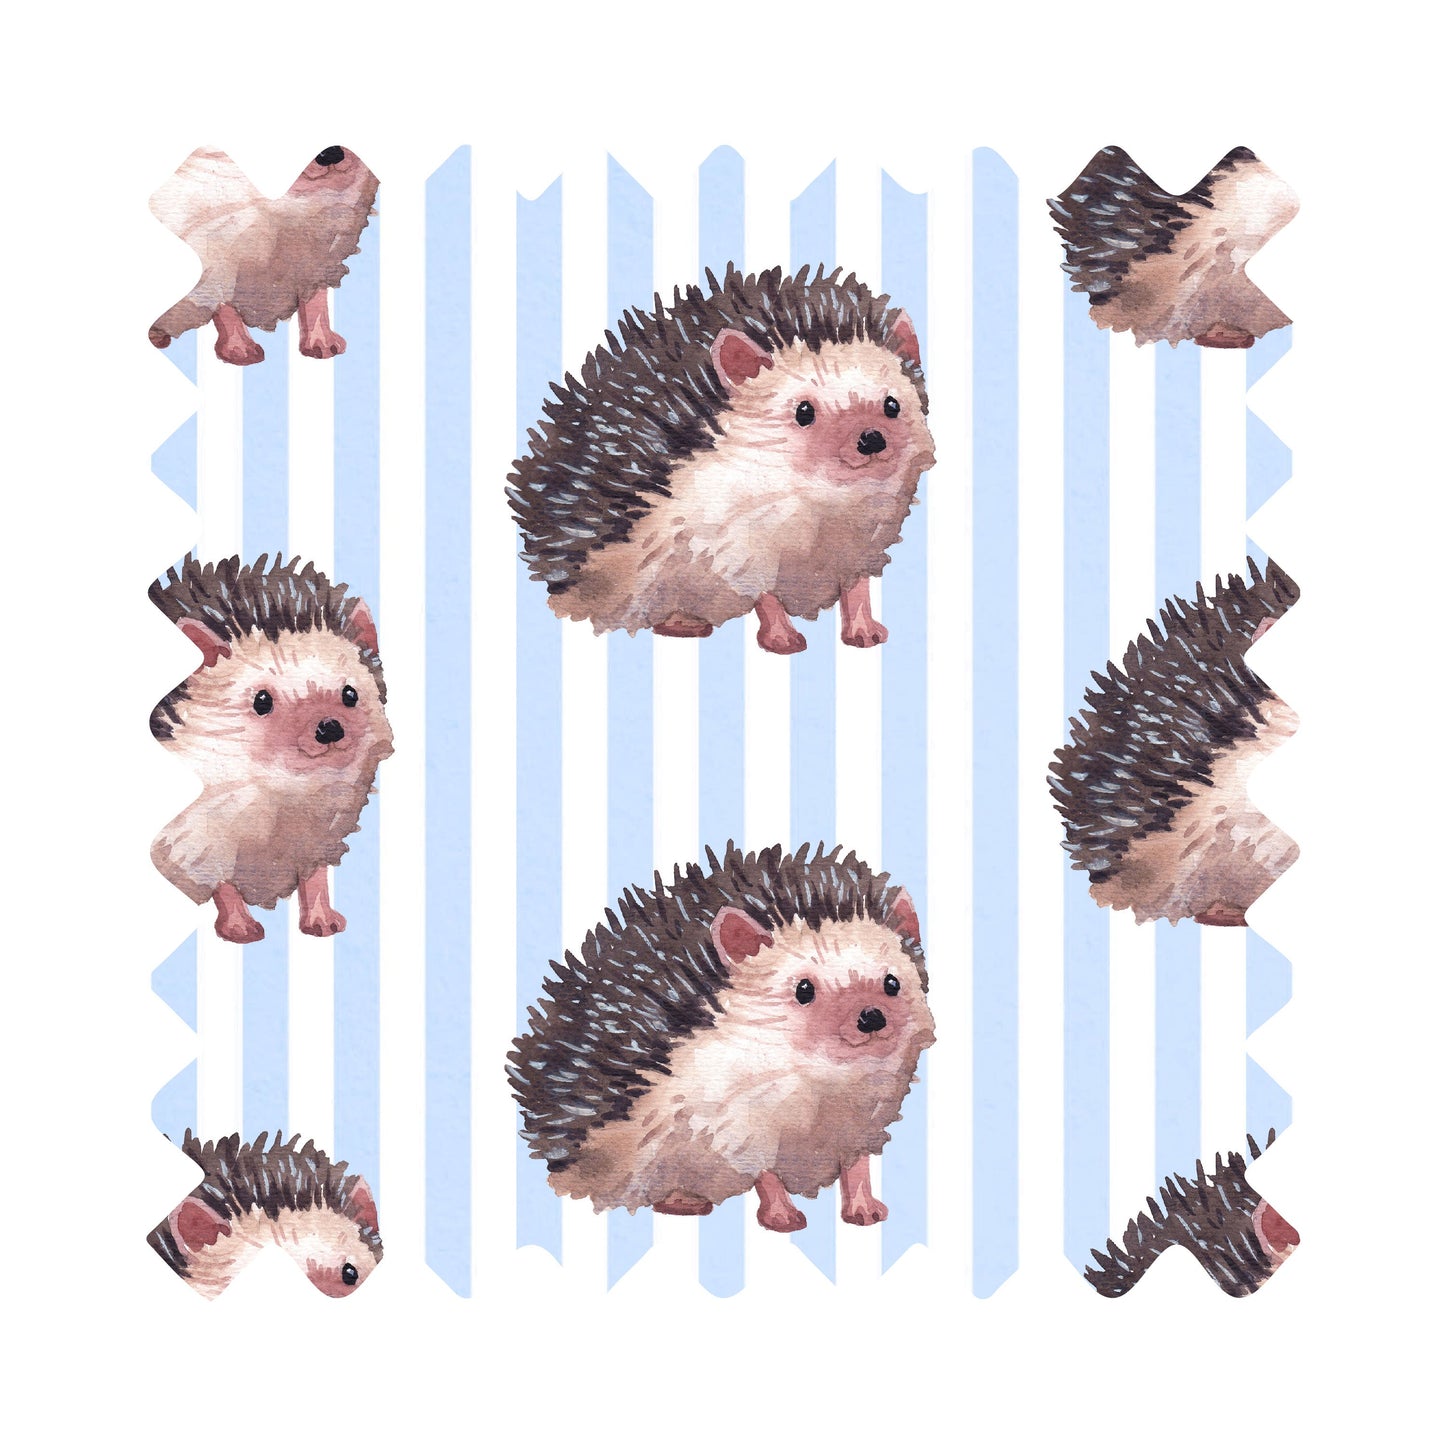 Henry Hedgehog Luxury Gift Wrap - Available in 2 Colors